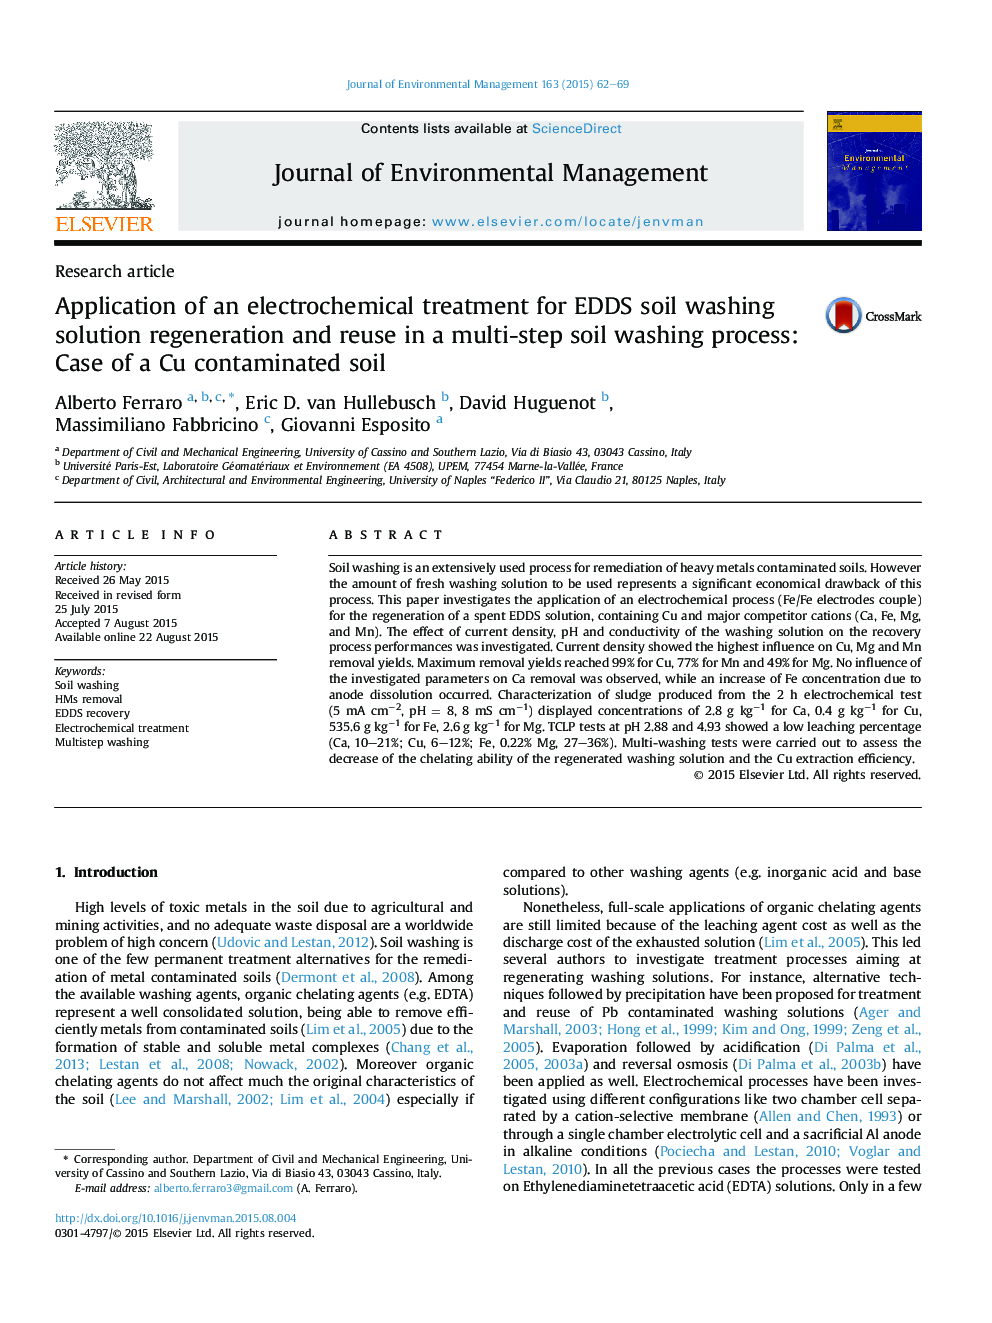 Application of an electrochemical treatment for EDDS soil washing solution regeneration and reuse in a multi-step soil washing process: Case of a Cu contaminated soil